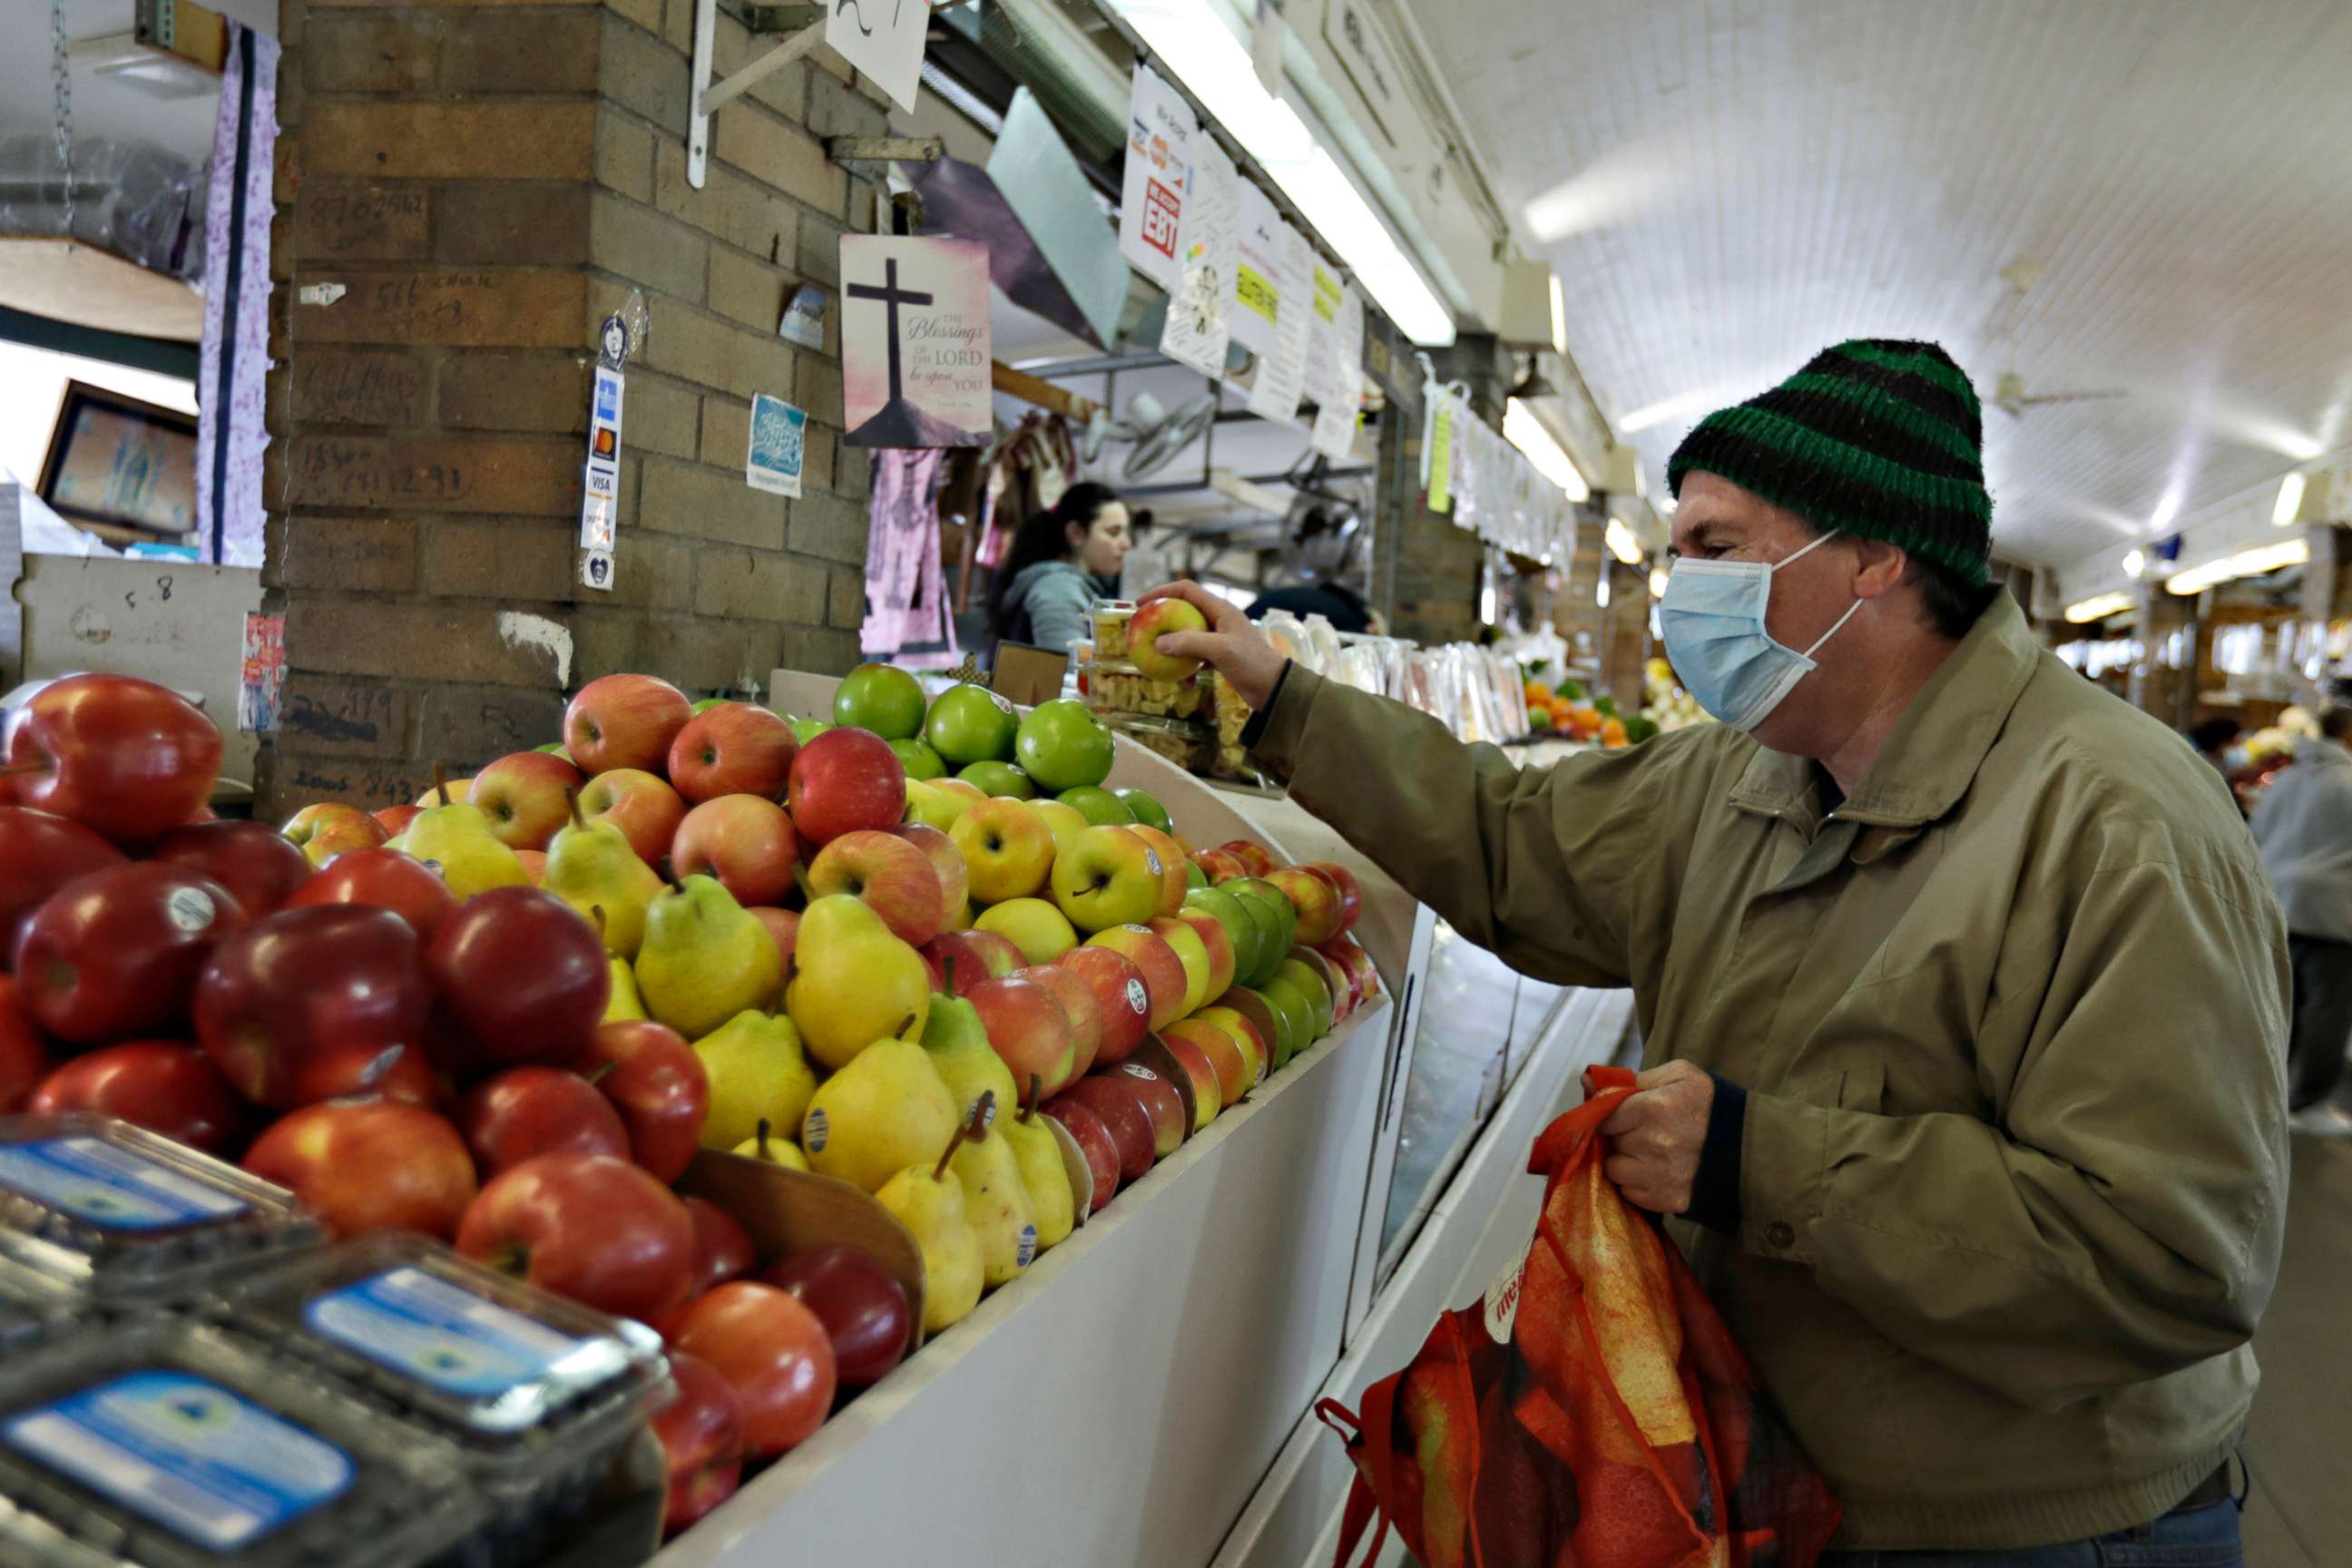 PHOTO: Rick Wittenmyer shops for groceries at the West Side Market, April 10, 2020, in Cleveland.